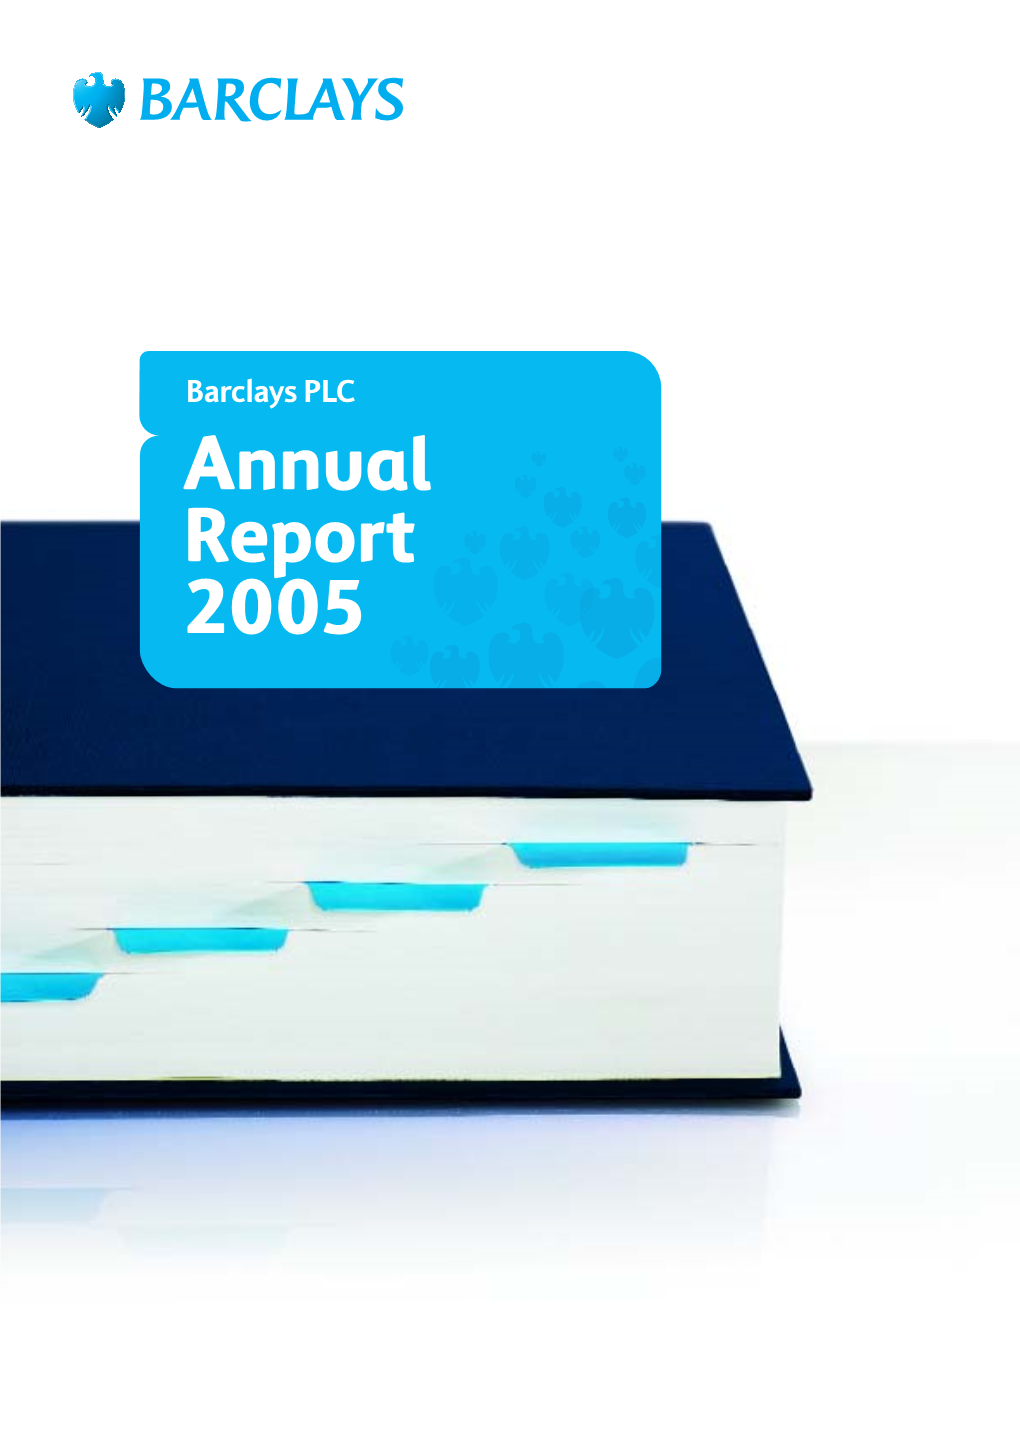 Barclays PLC Annual Report 2005